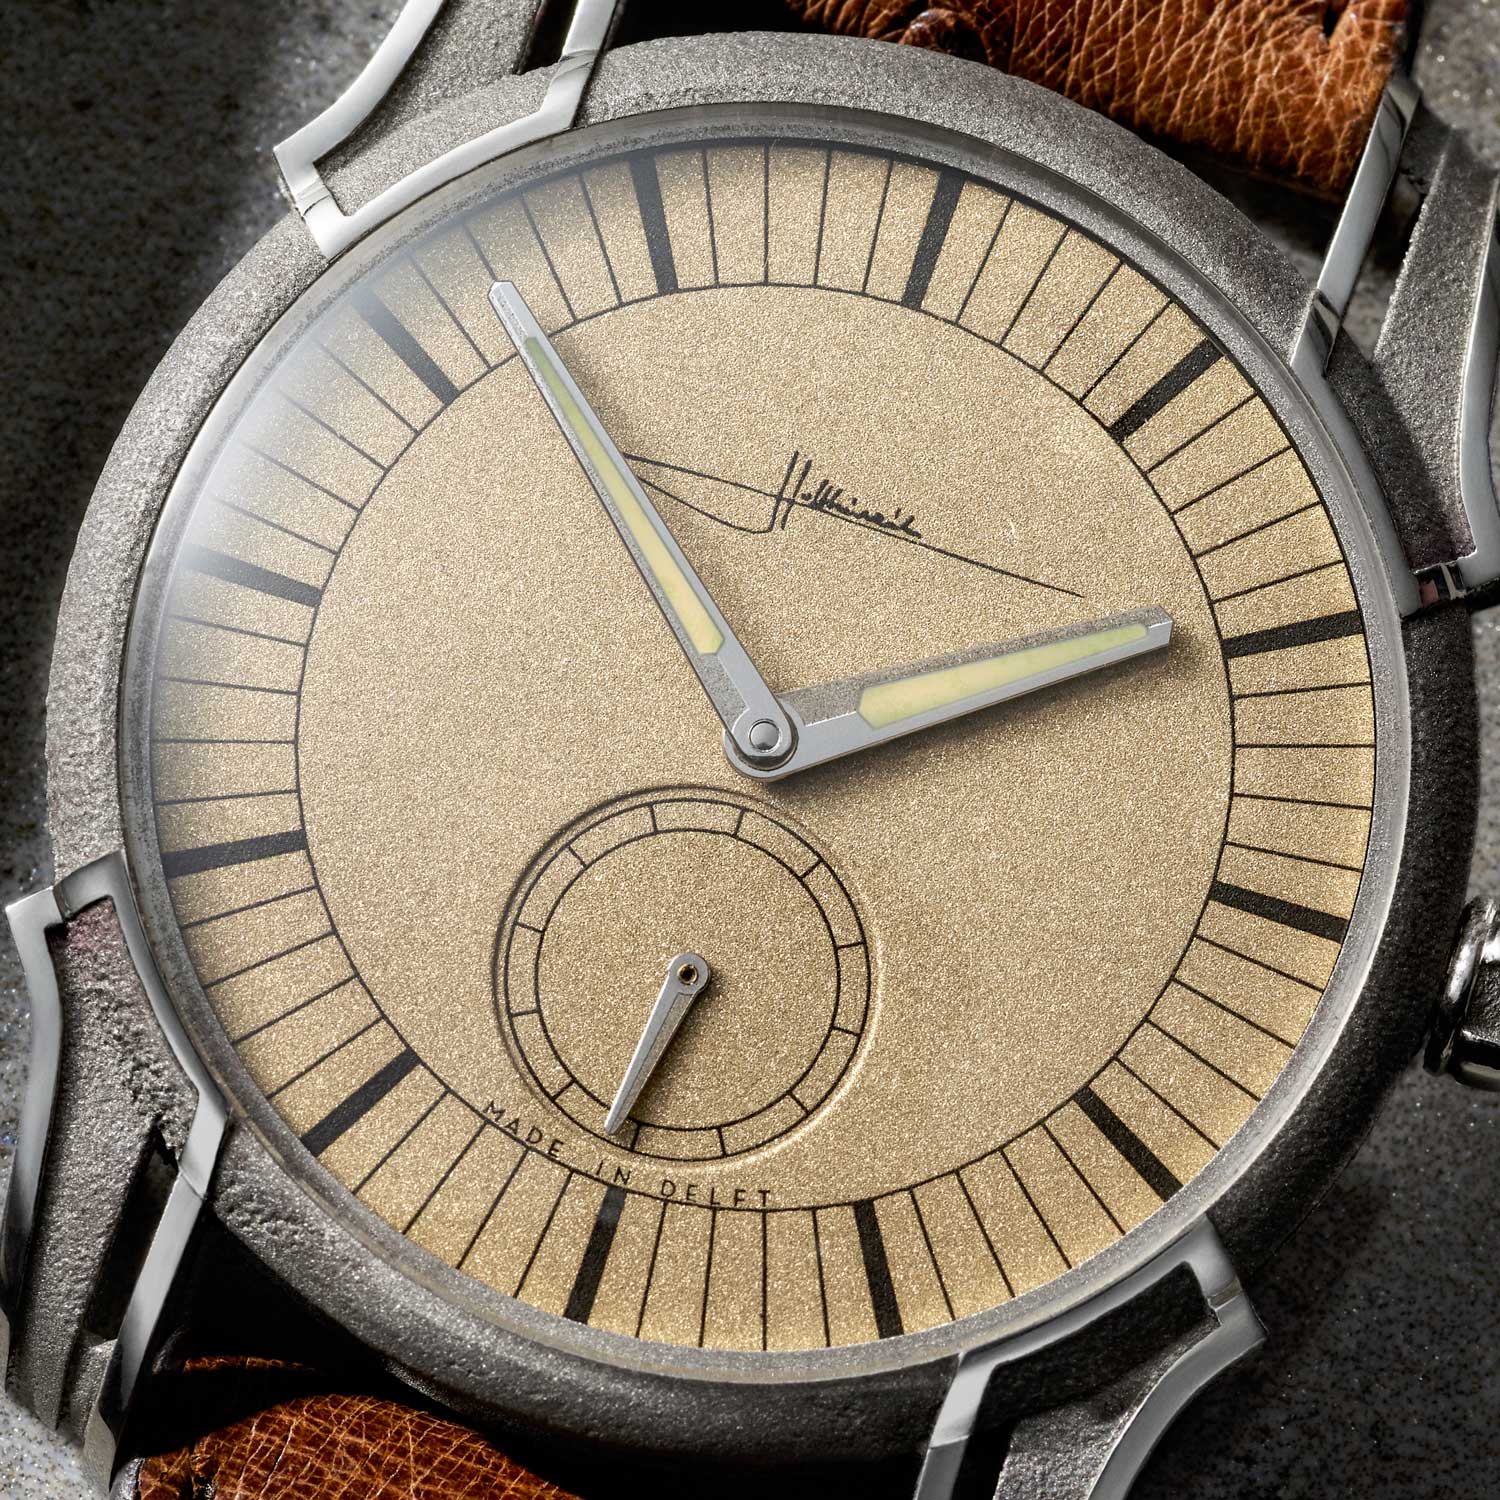 A close up of the Holthinrichs Watches RAW Ornament - Pale Gold - beautifully frosted satin finish dial